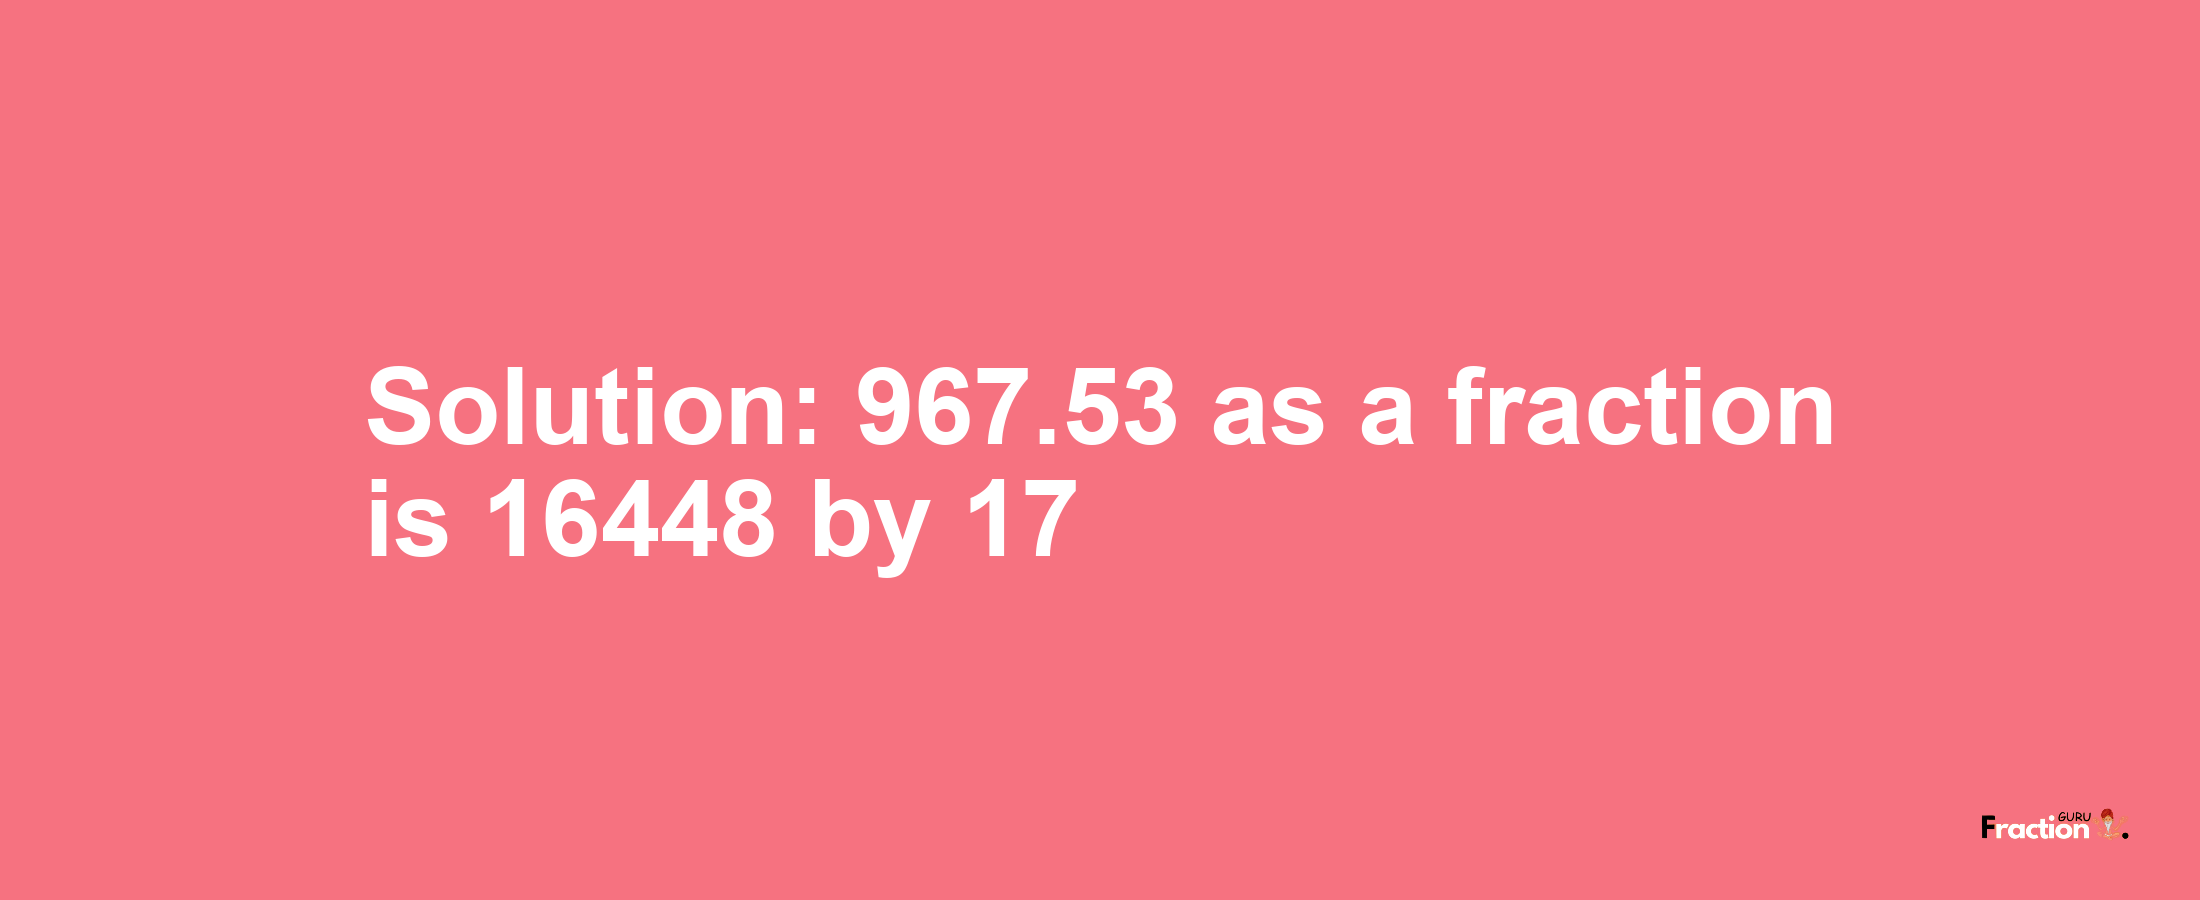 Solution:967.53 as a fraction is 16448/17